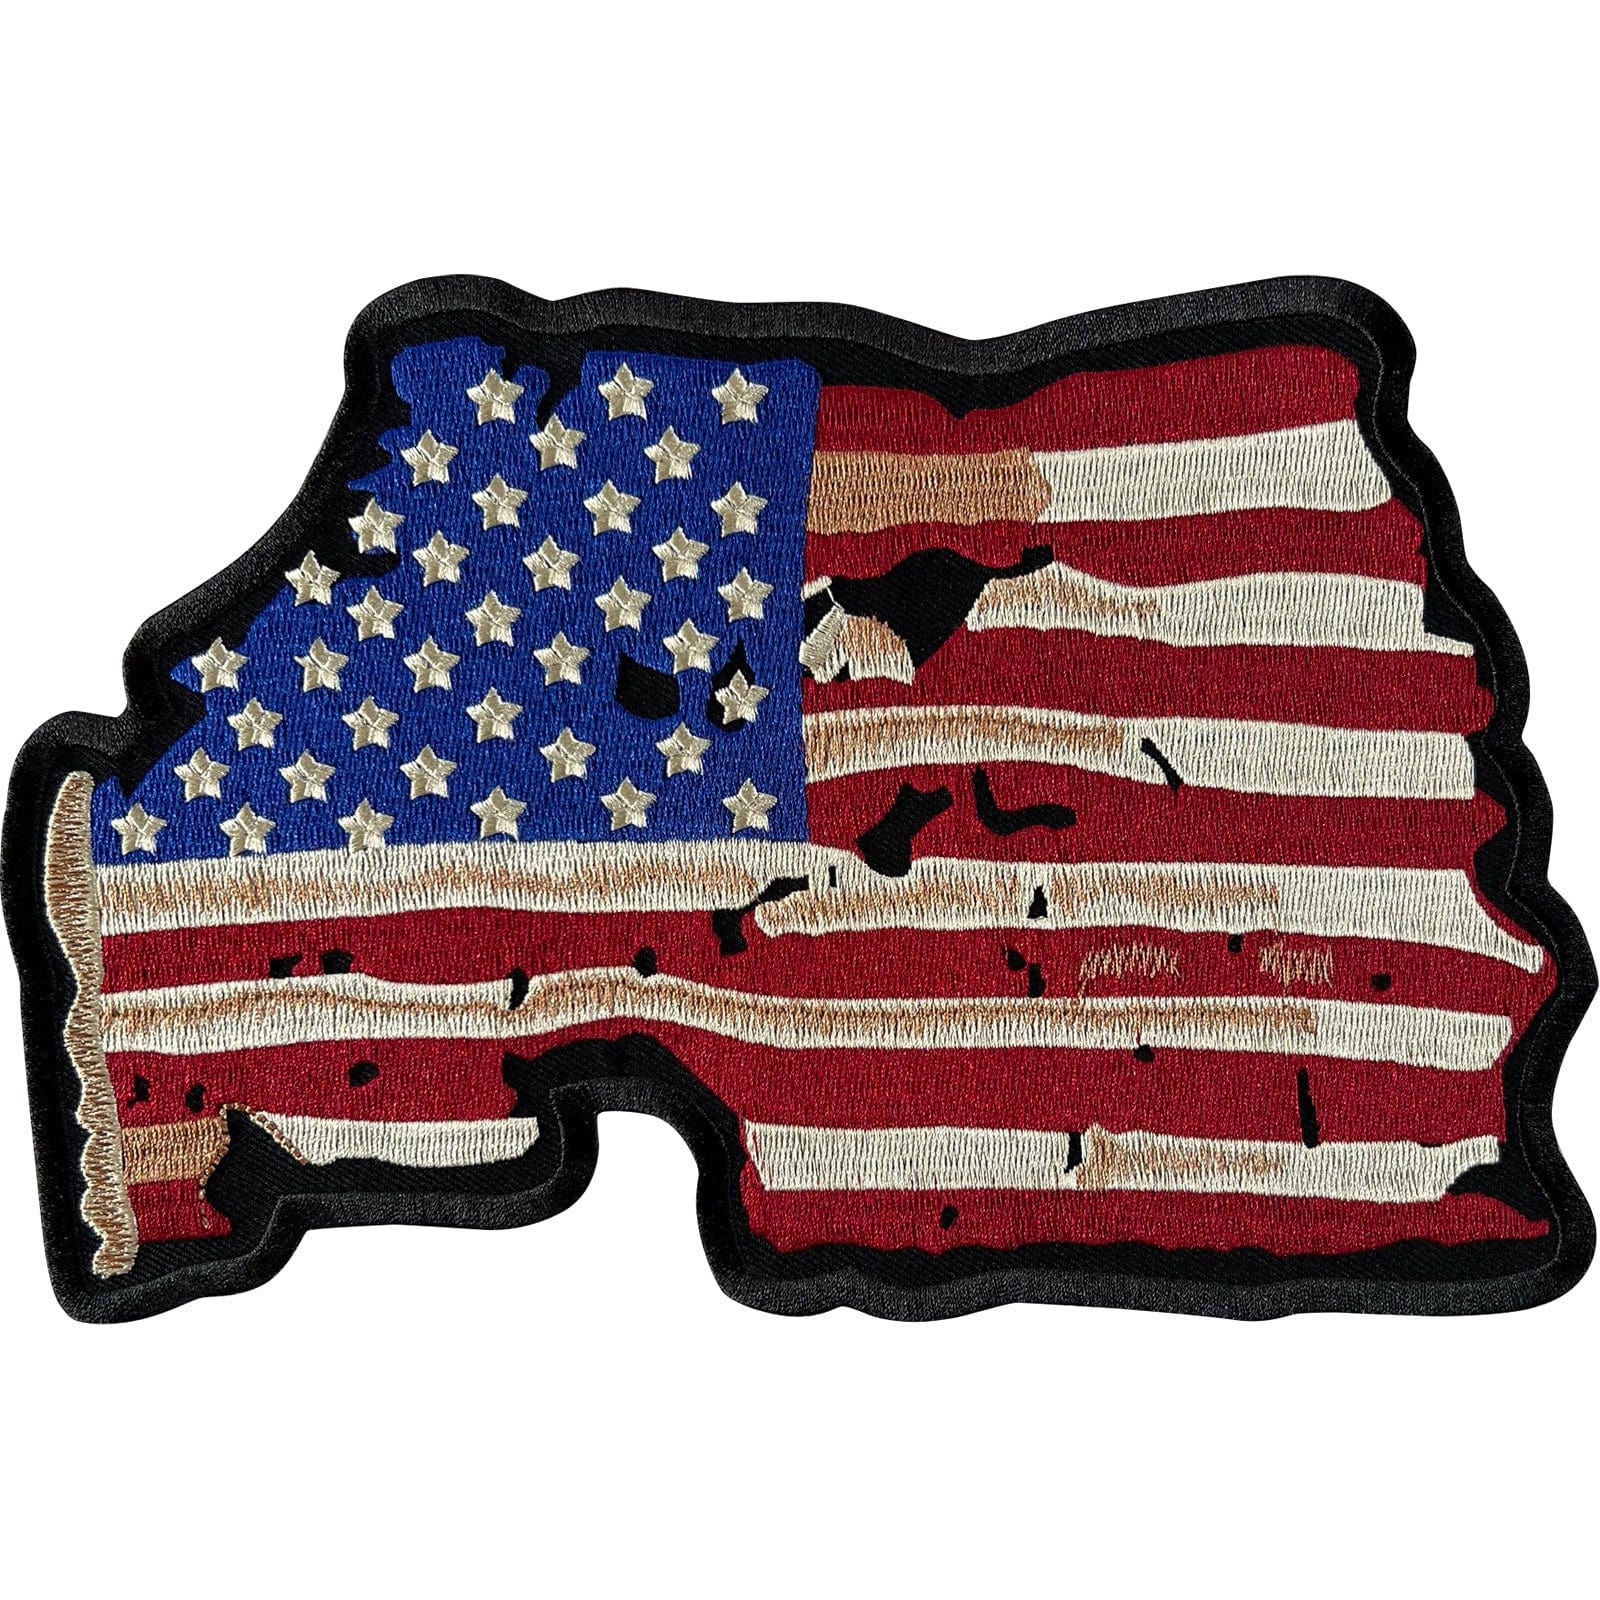 Big Large USA Flag Patch Iron On Sew On America United States Embroidered Badge